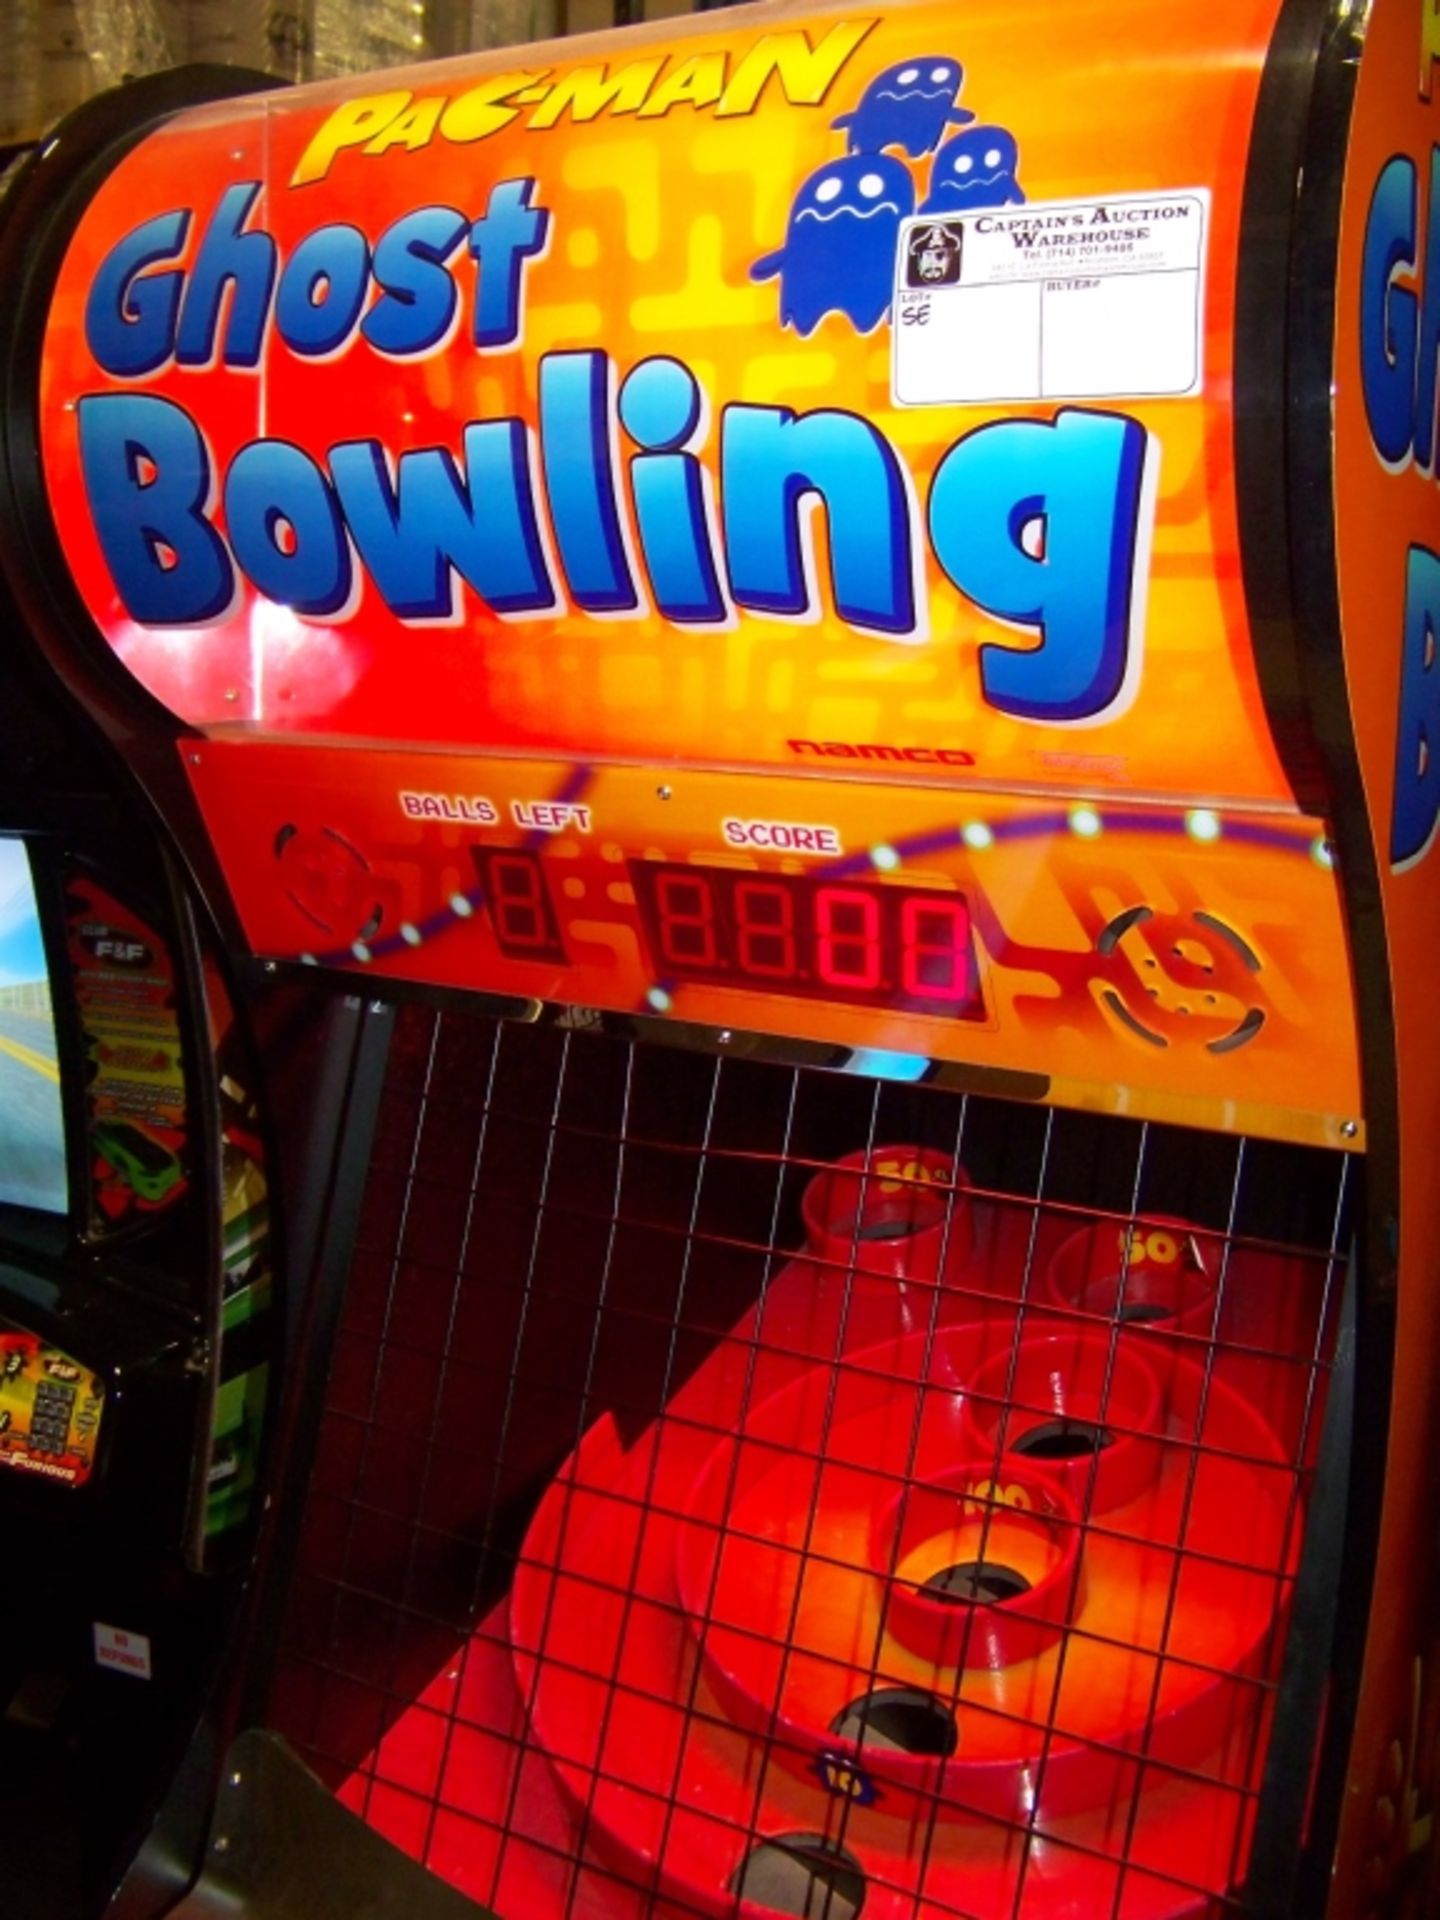 PACMAN GHOST BOWLING REDEMPTION GAME NAMCO - Image 4 of 6